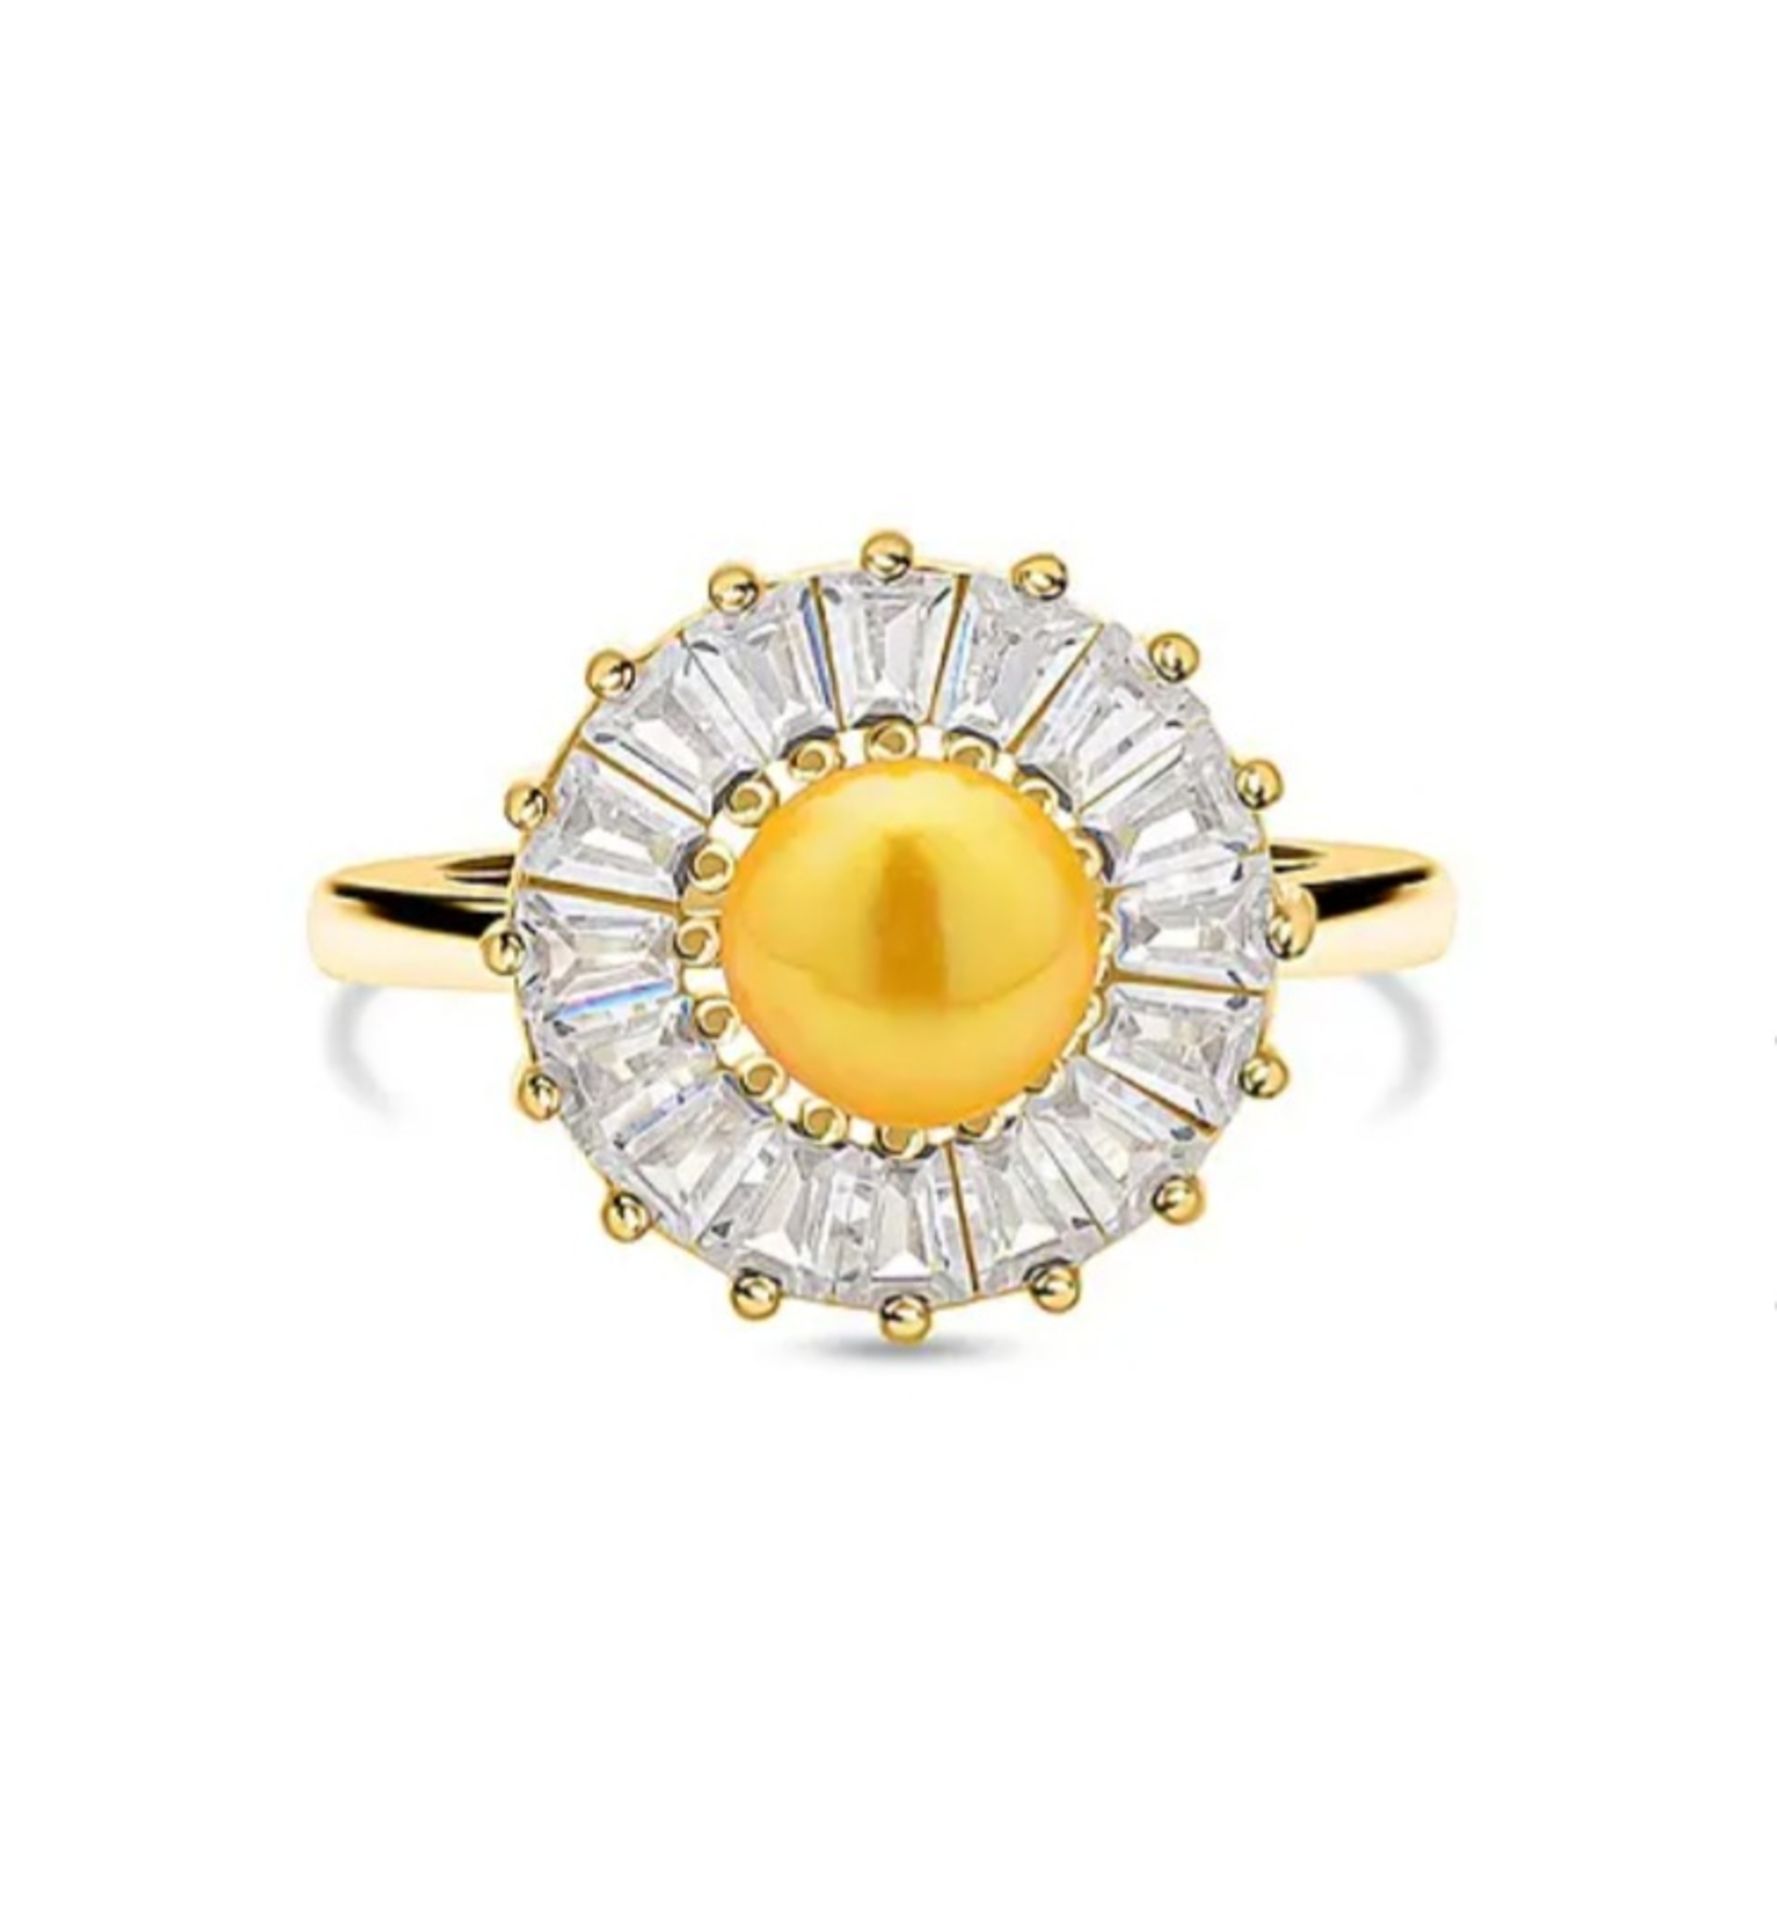 NEW! Golden Fresh Water Pearl and Simulated Diamond Floral Ring - Image 2 of 4